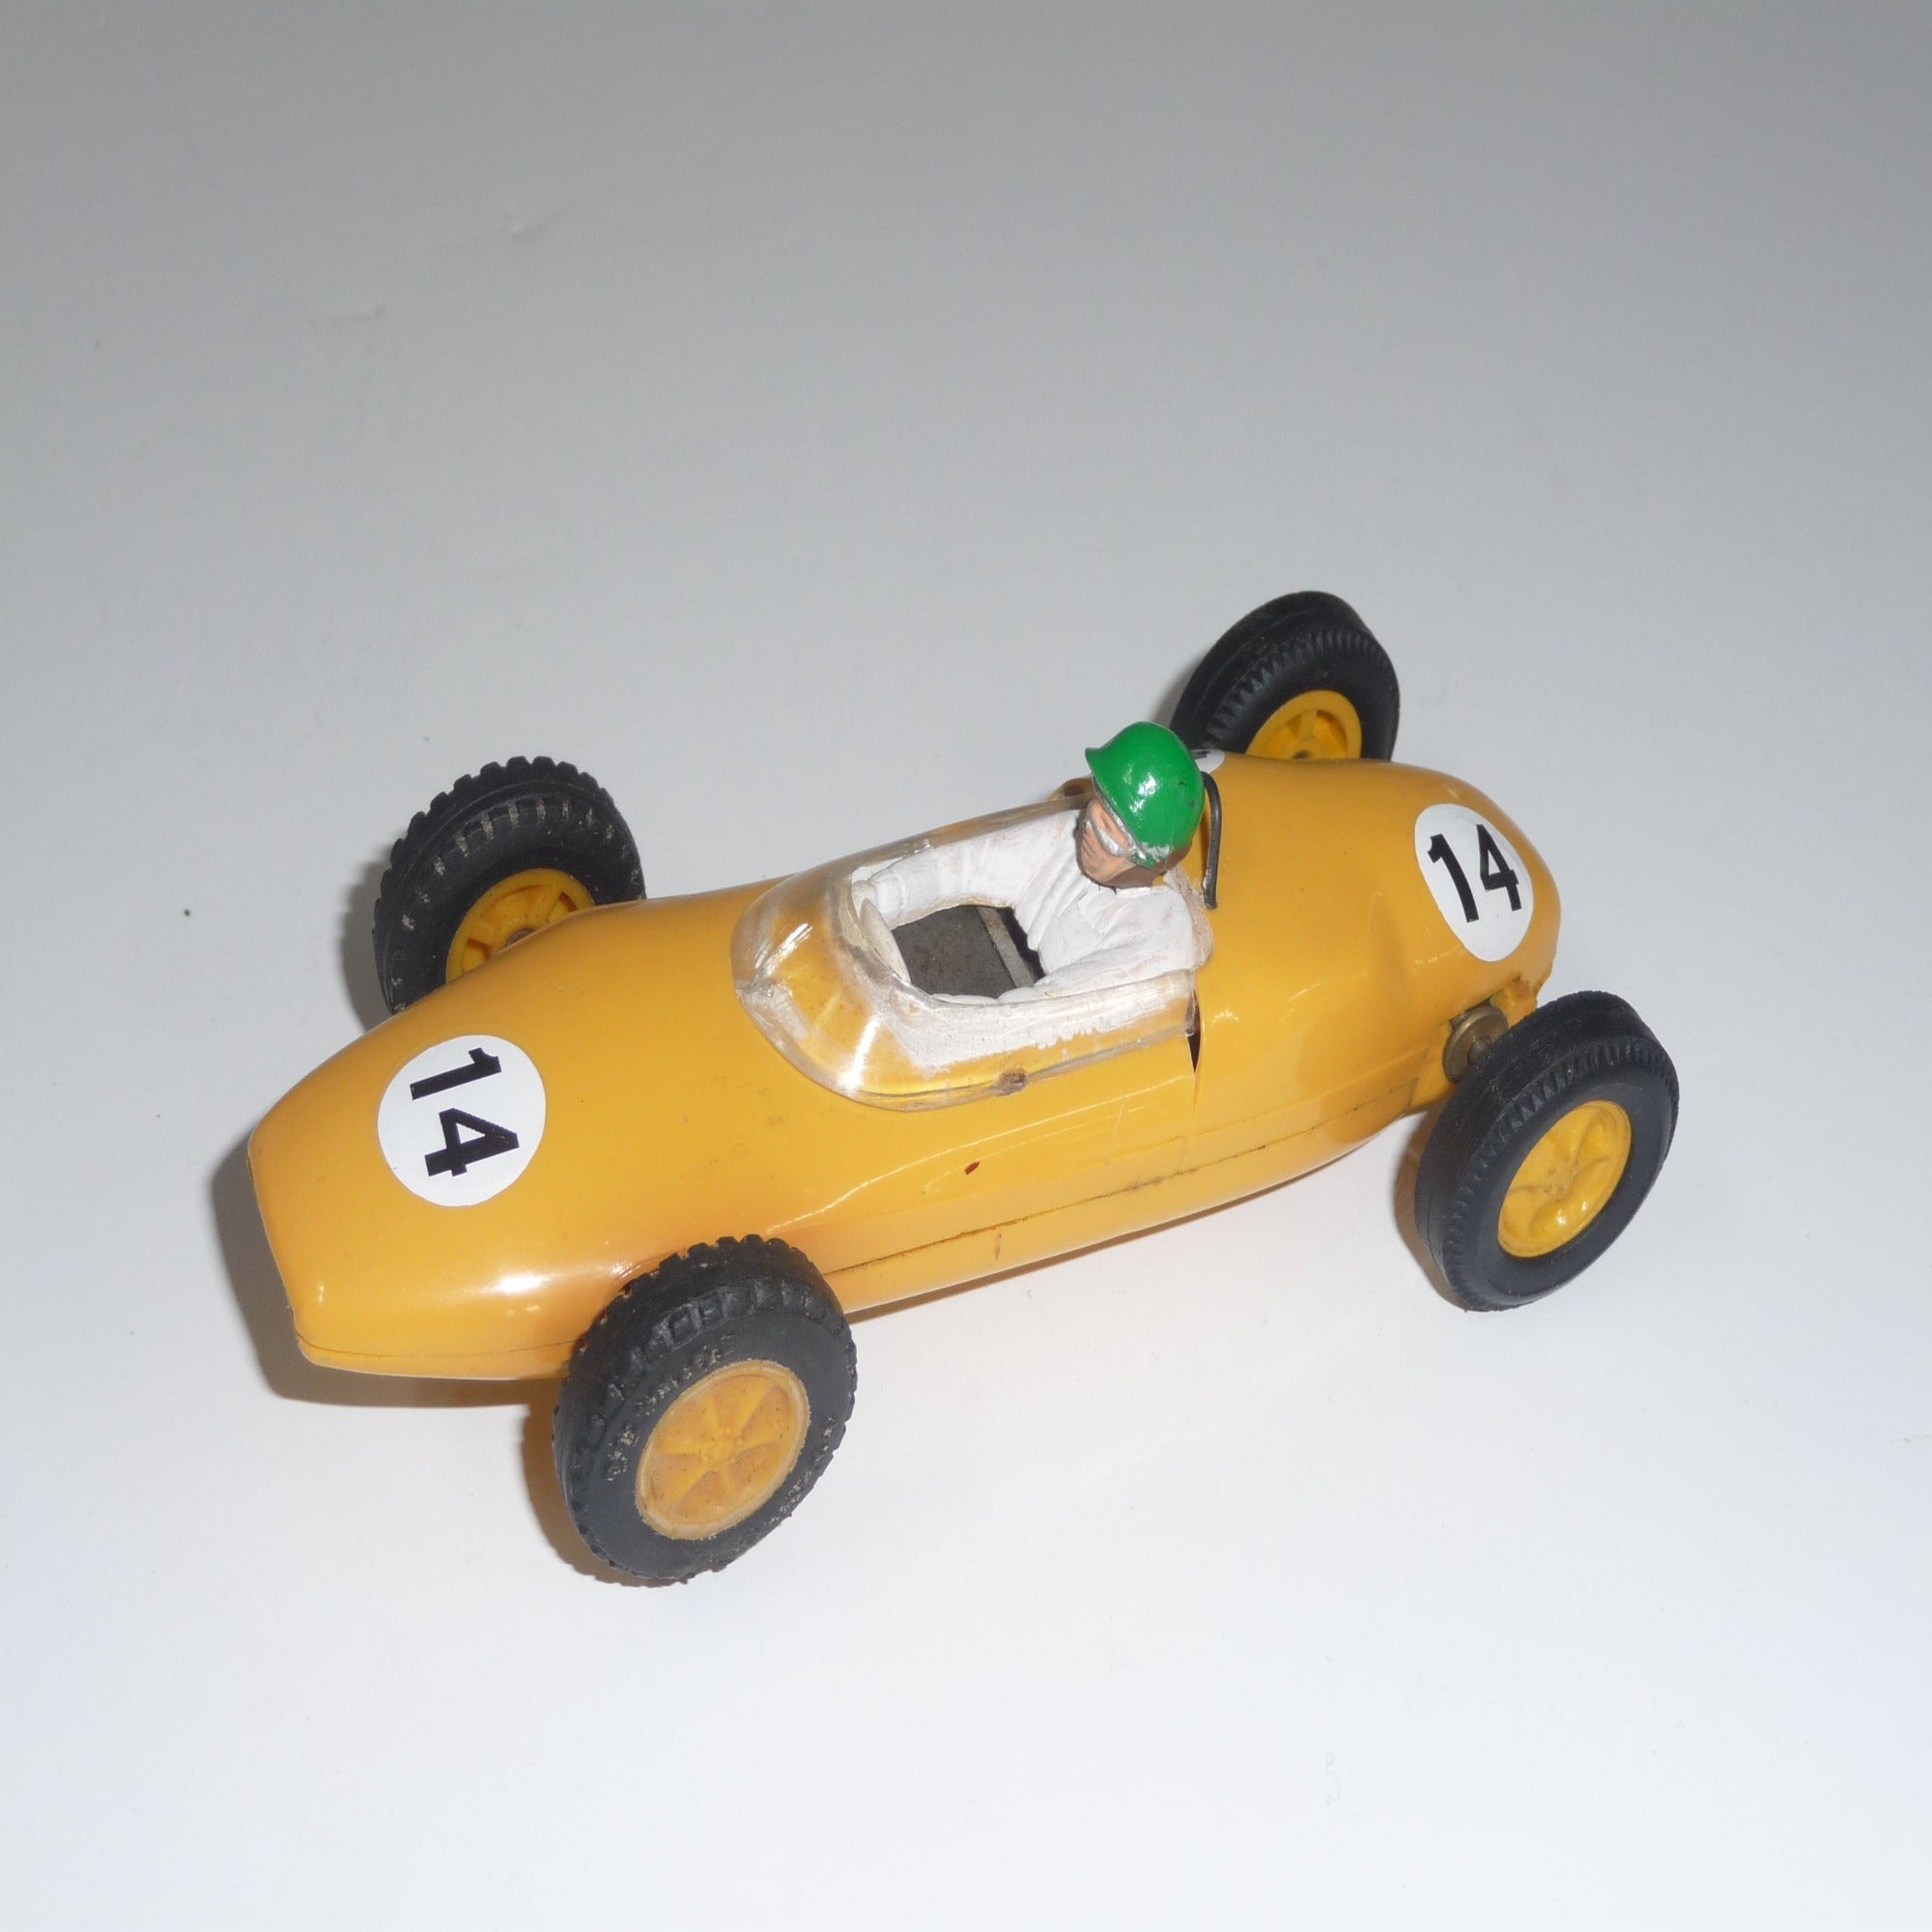 Used Scalextric Lotus F1 1961  Free Postage on Orders over $40